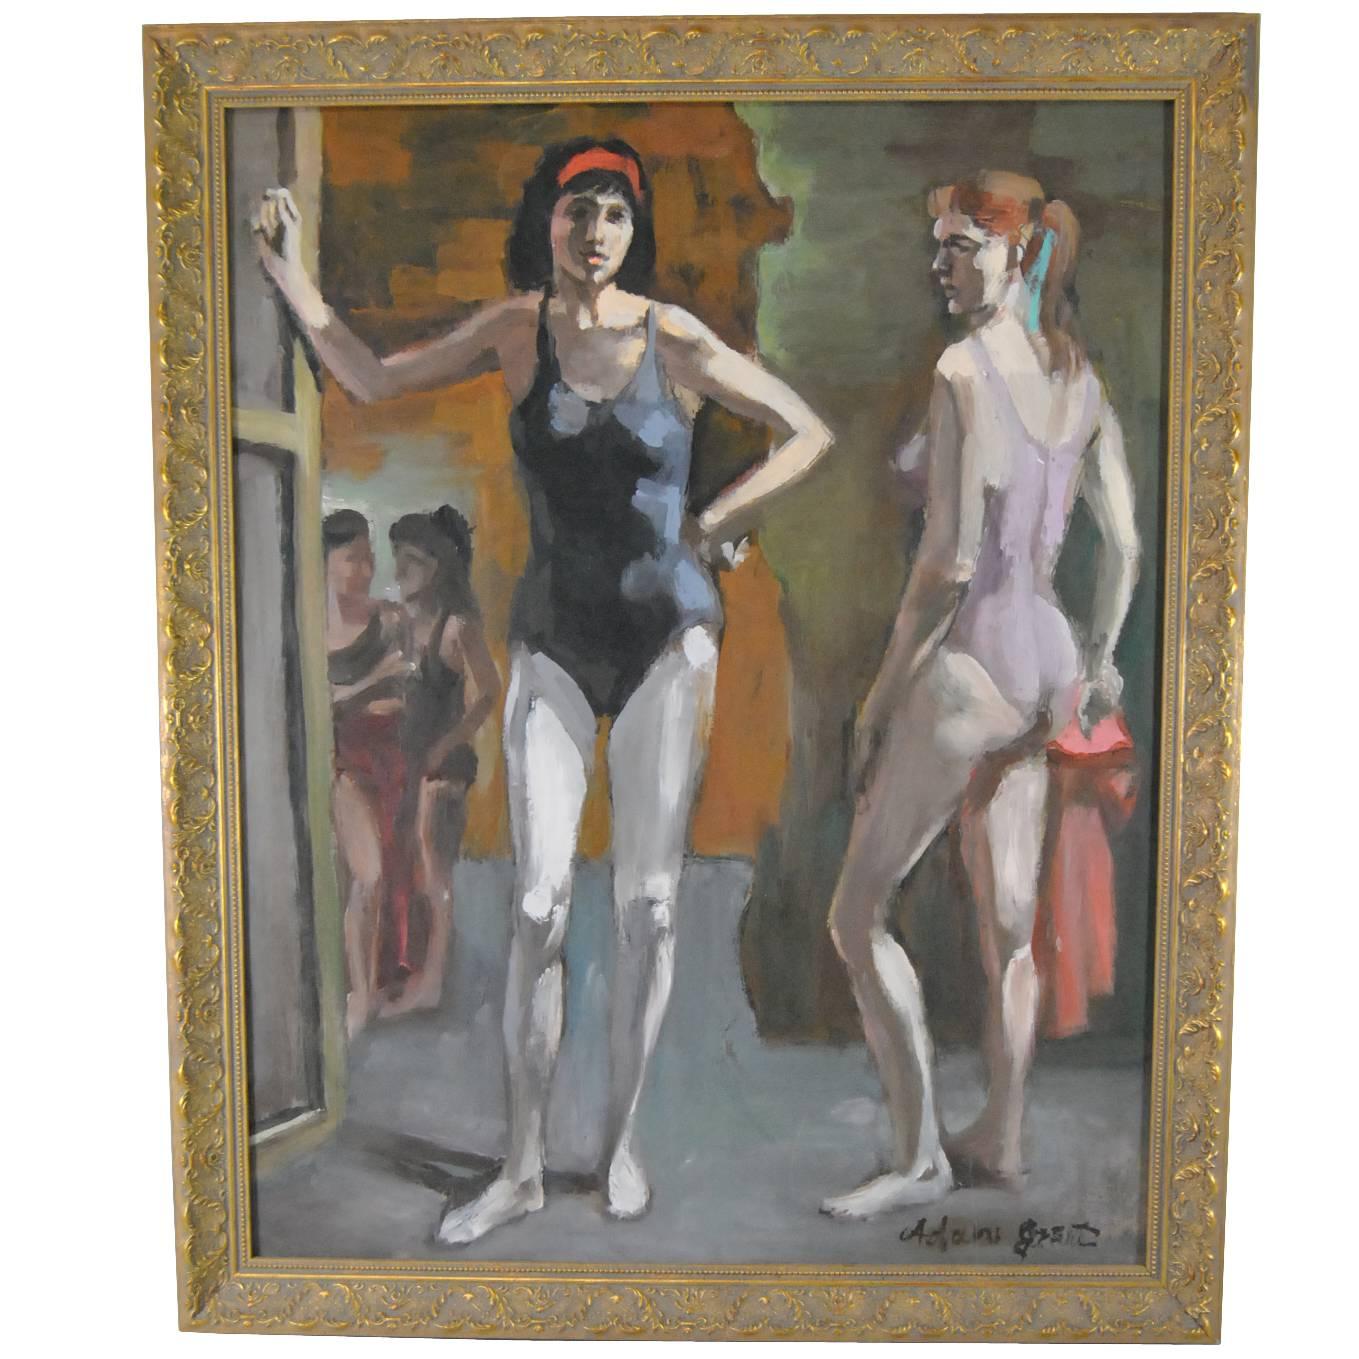 Impresstionists Oil on Board Painting of Ballerinas by Adam Grant